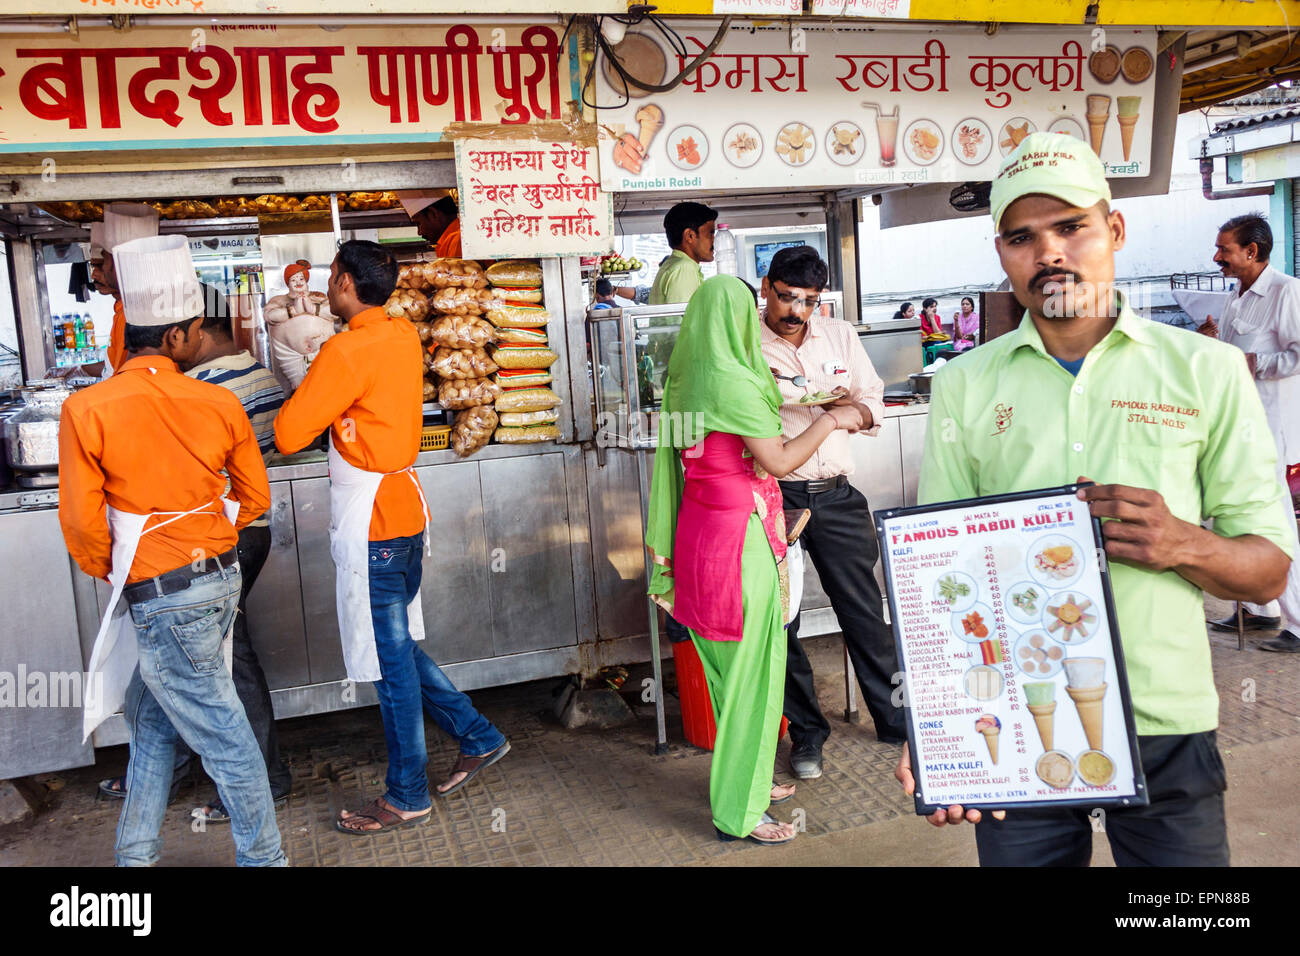 Mumbai Inde,Girgaon,Marine Drive,Chowpatty Beach,public,concessions,foodstall,stands,stand,stands,stands,stands,stands,stands,fournisseurs,marchands,marché,hommes Banque D'Images